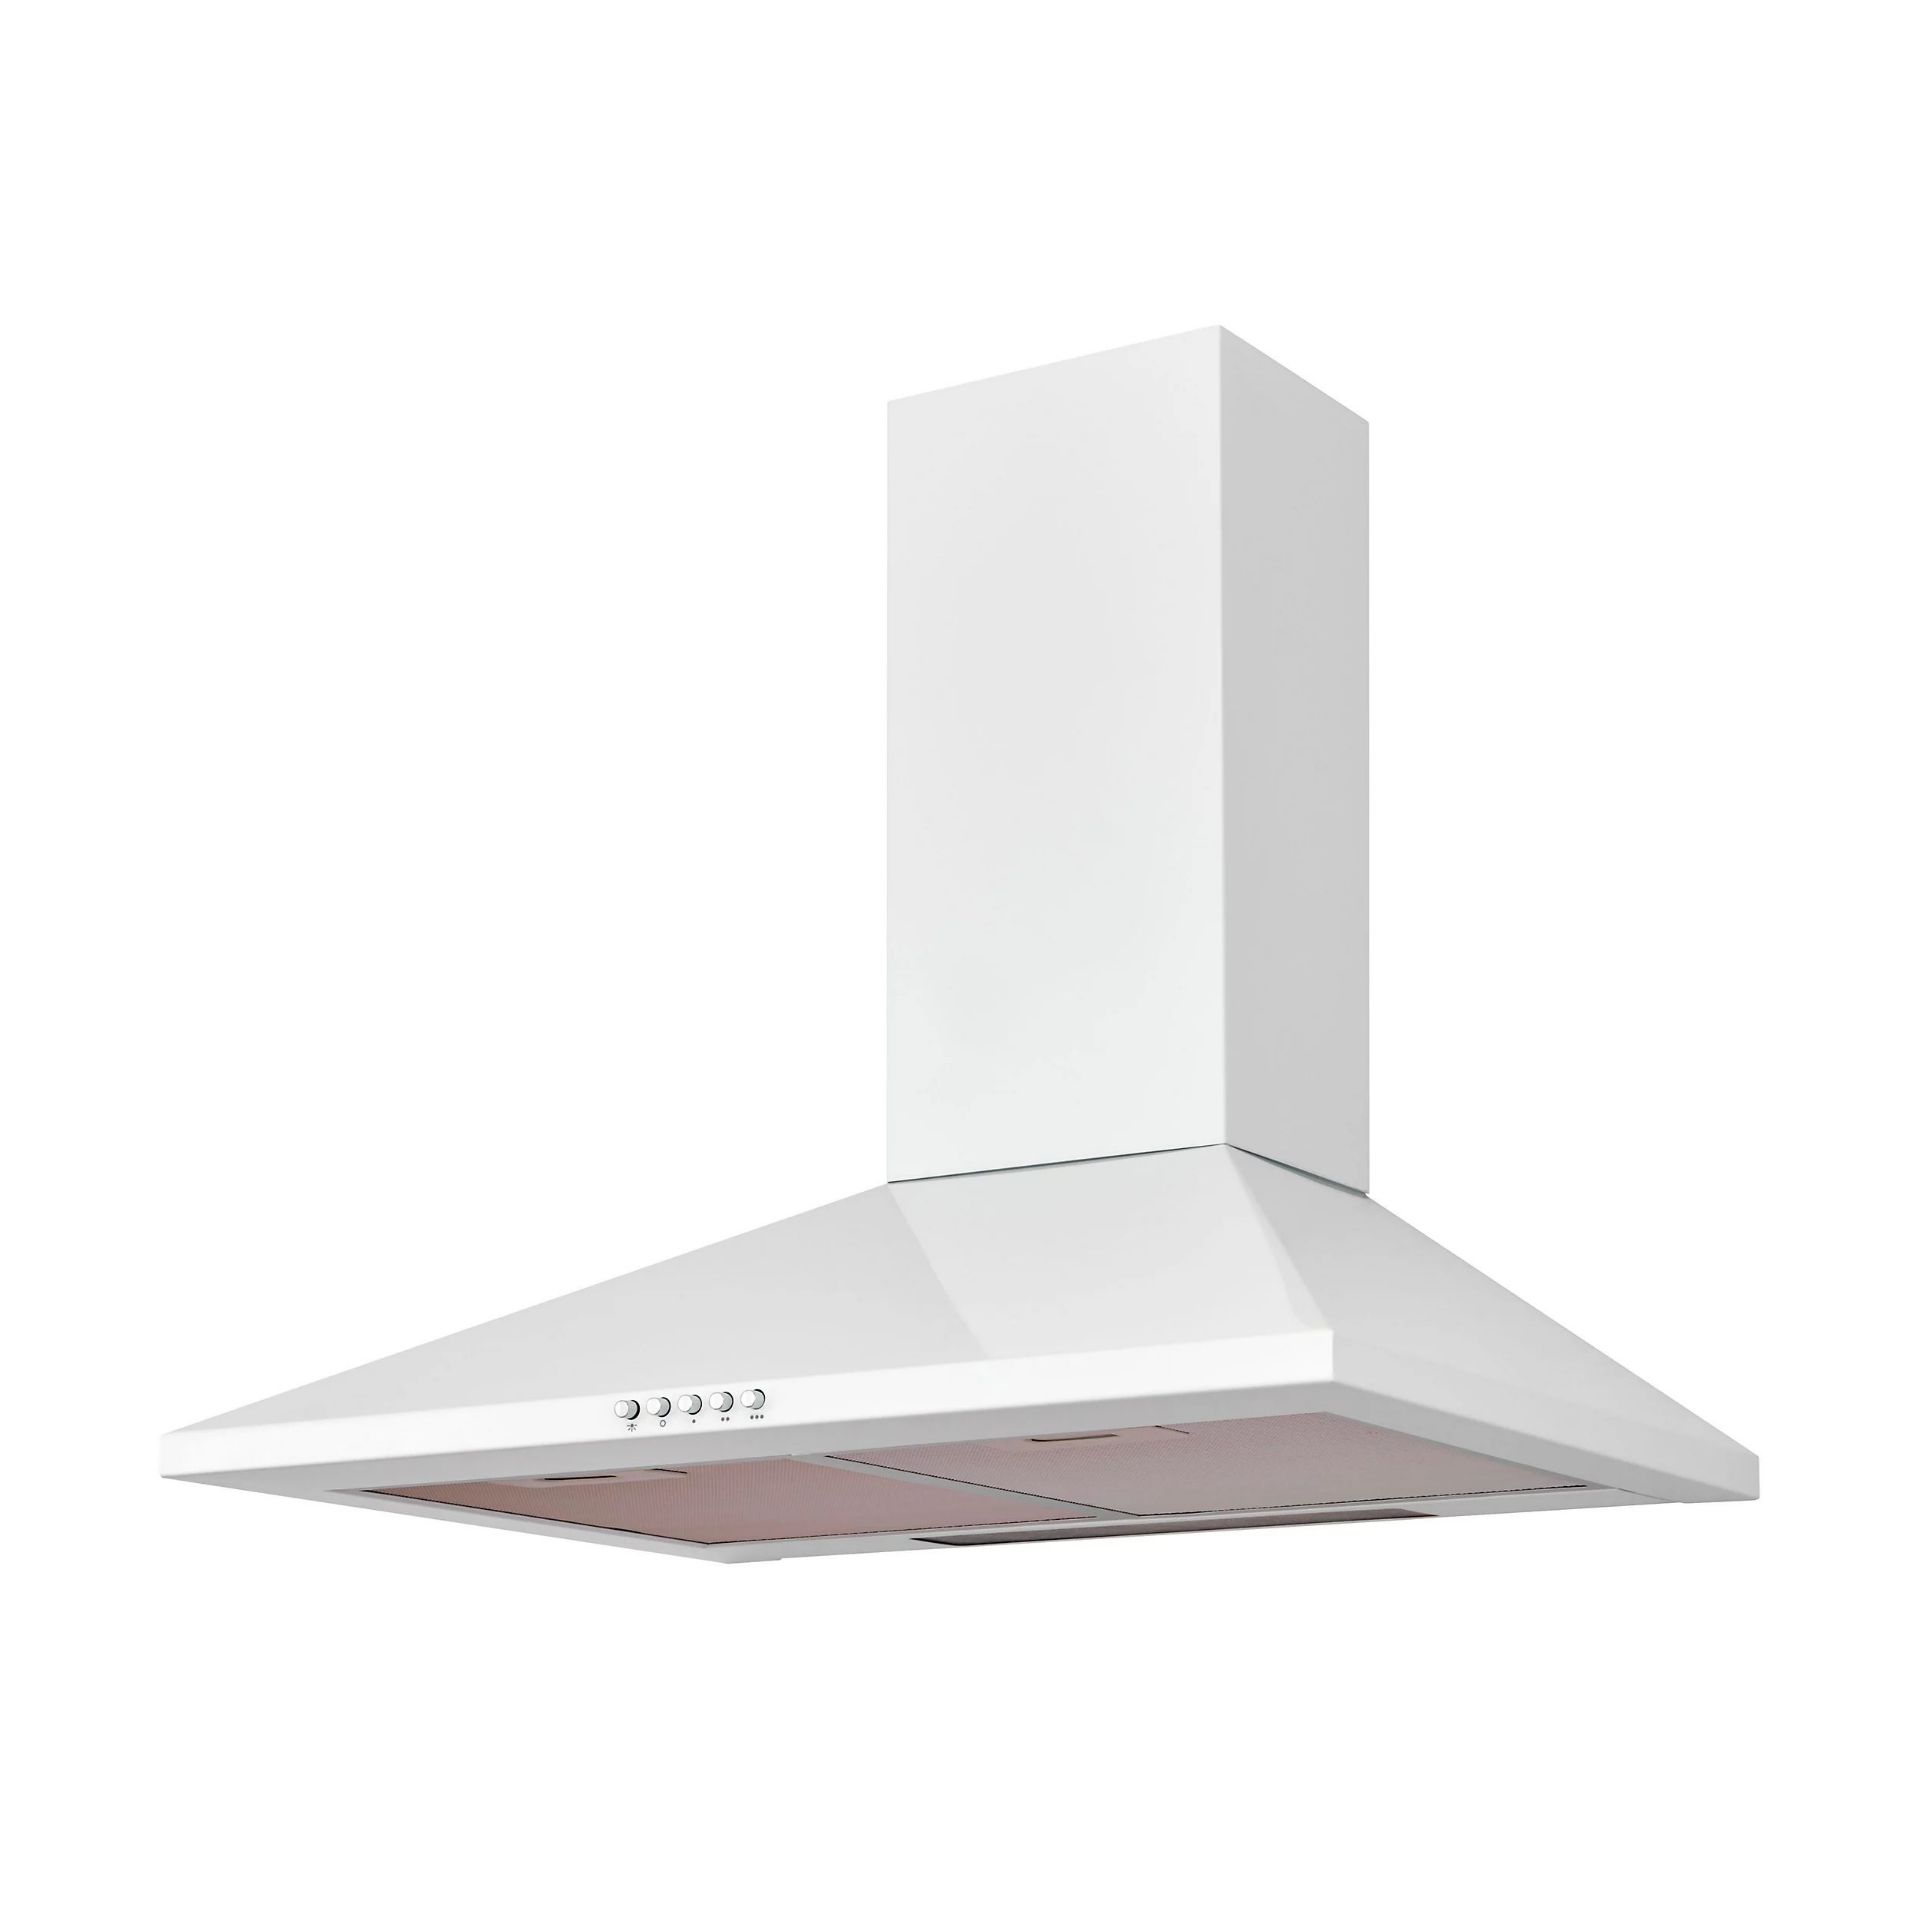 BRAND NEW COOKE AND LEWIS CHW60 WHITE CHIMNEY HOOD R16-4